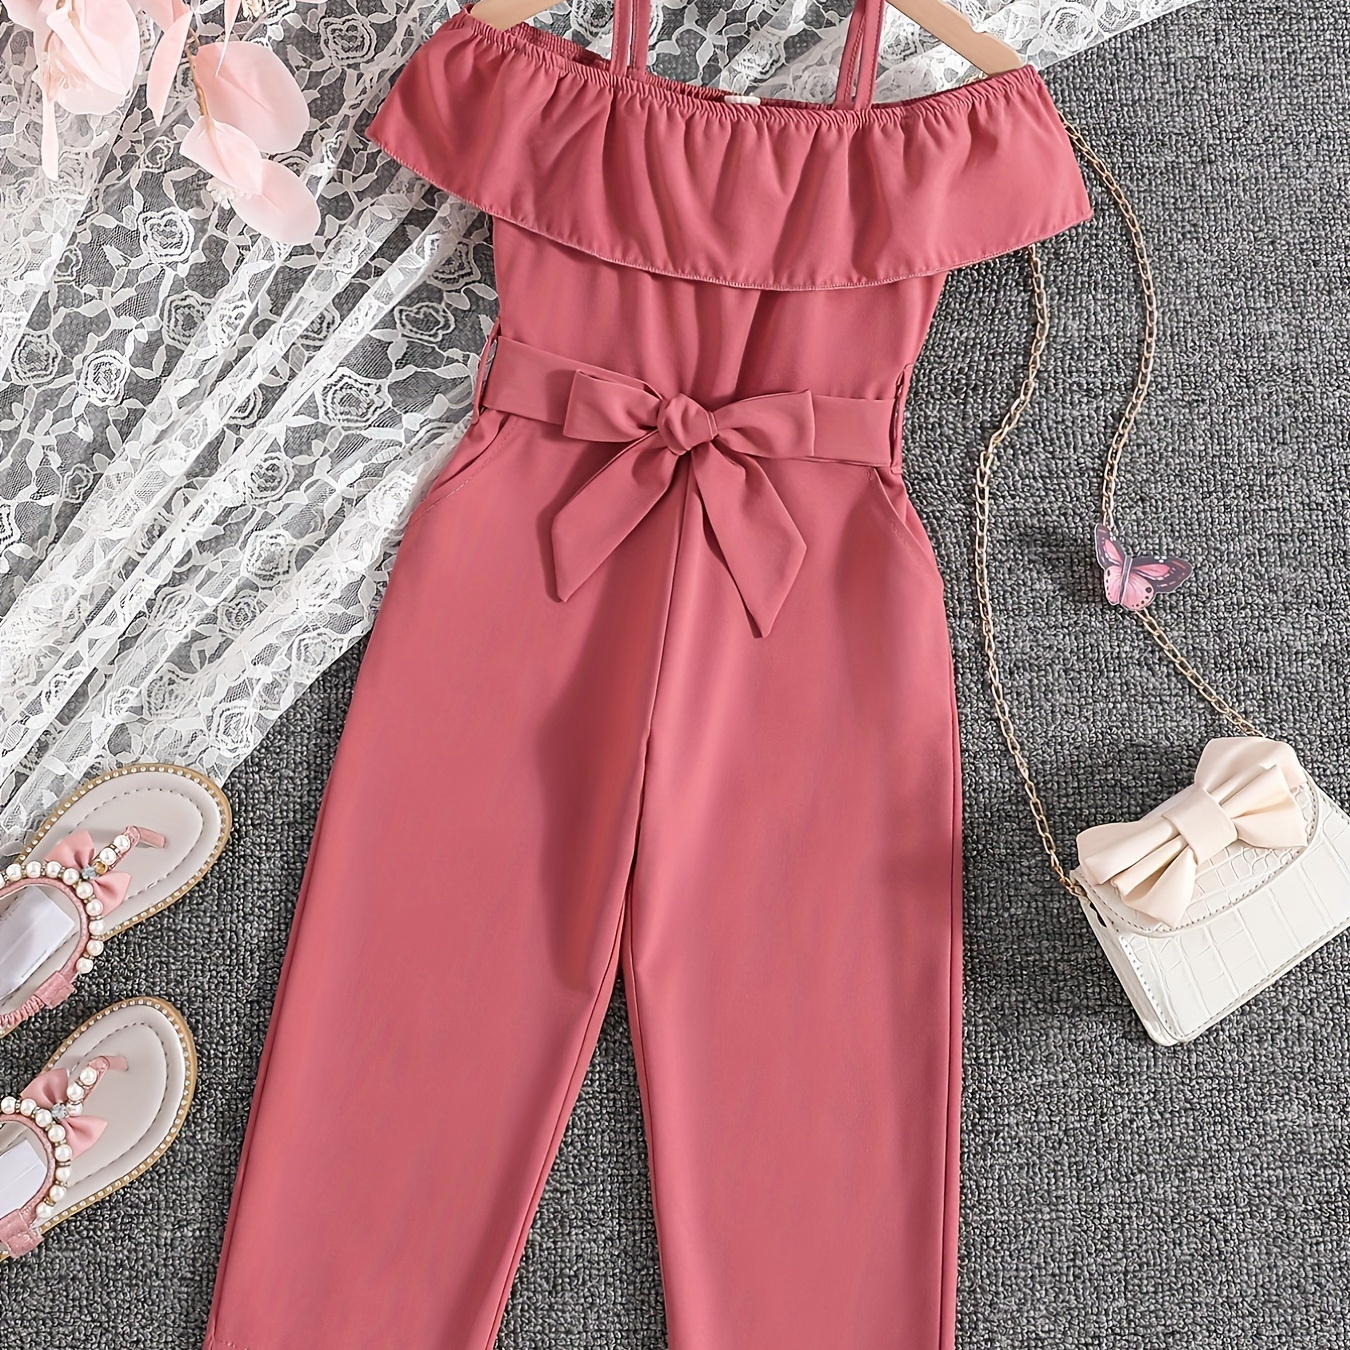 

Elegant Cold Shoulder Ruffle Trim Romper Girls Comfy Overalls Jumpsuit With Bow Belt For Spring Summer Fall Party Gift